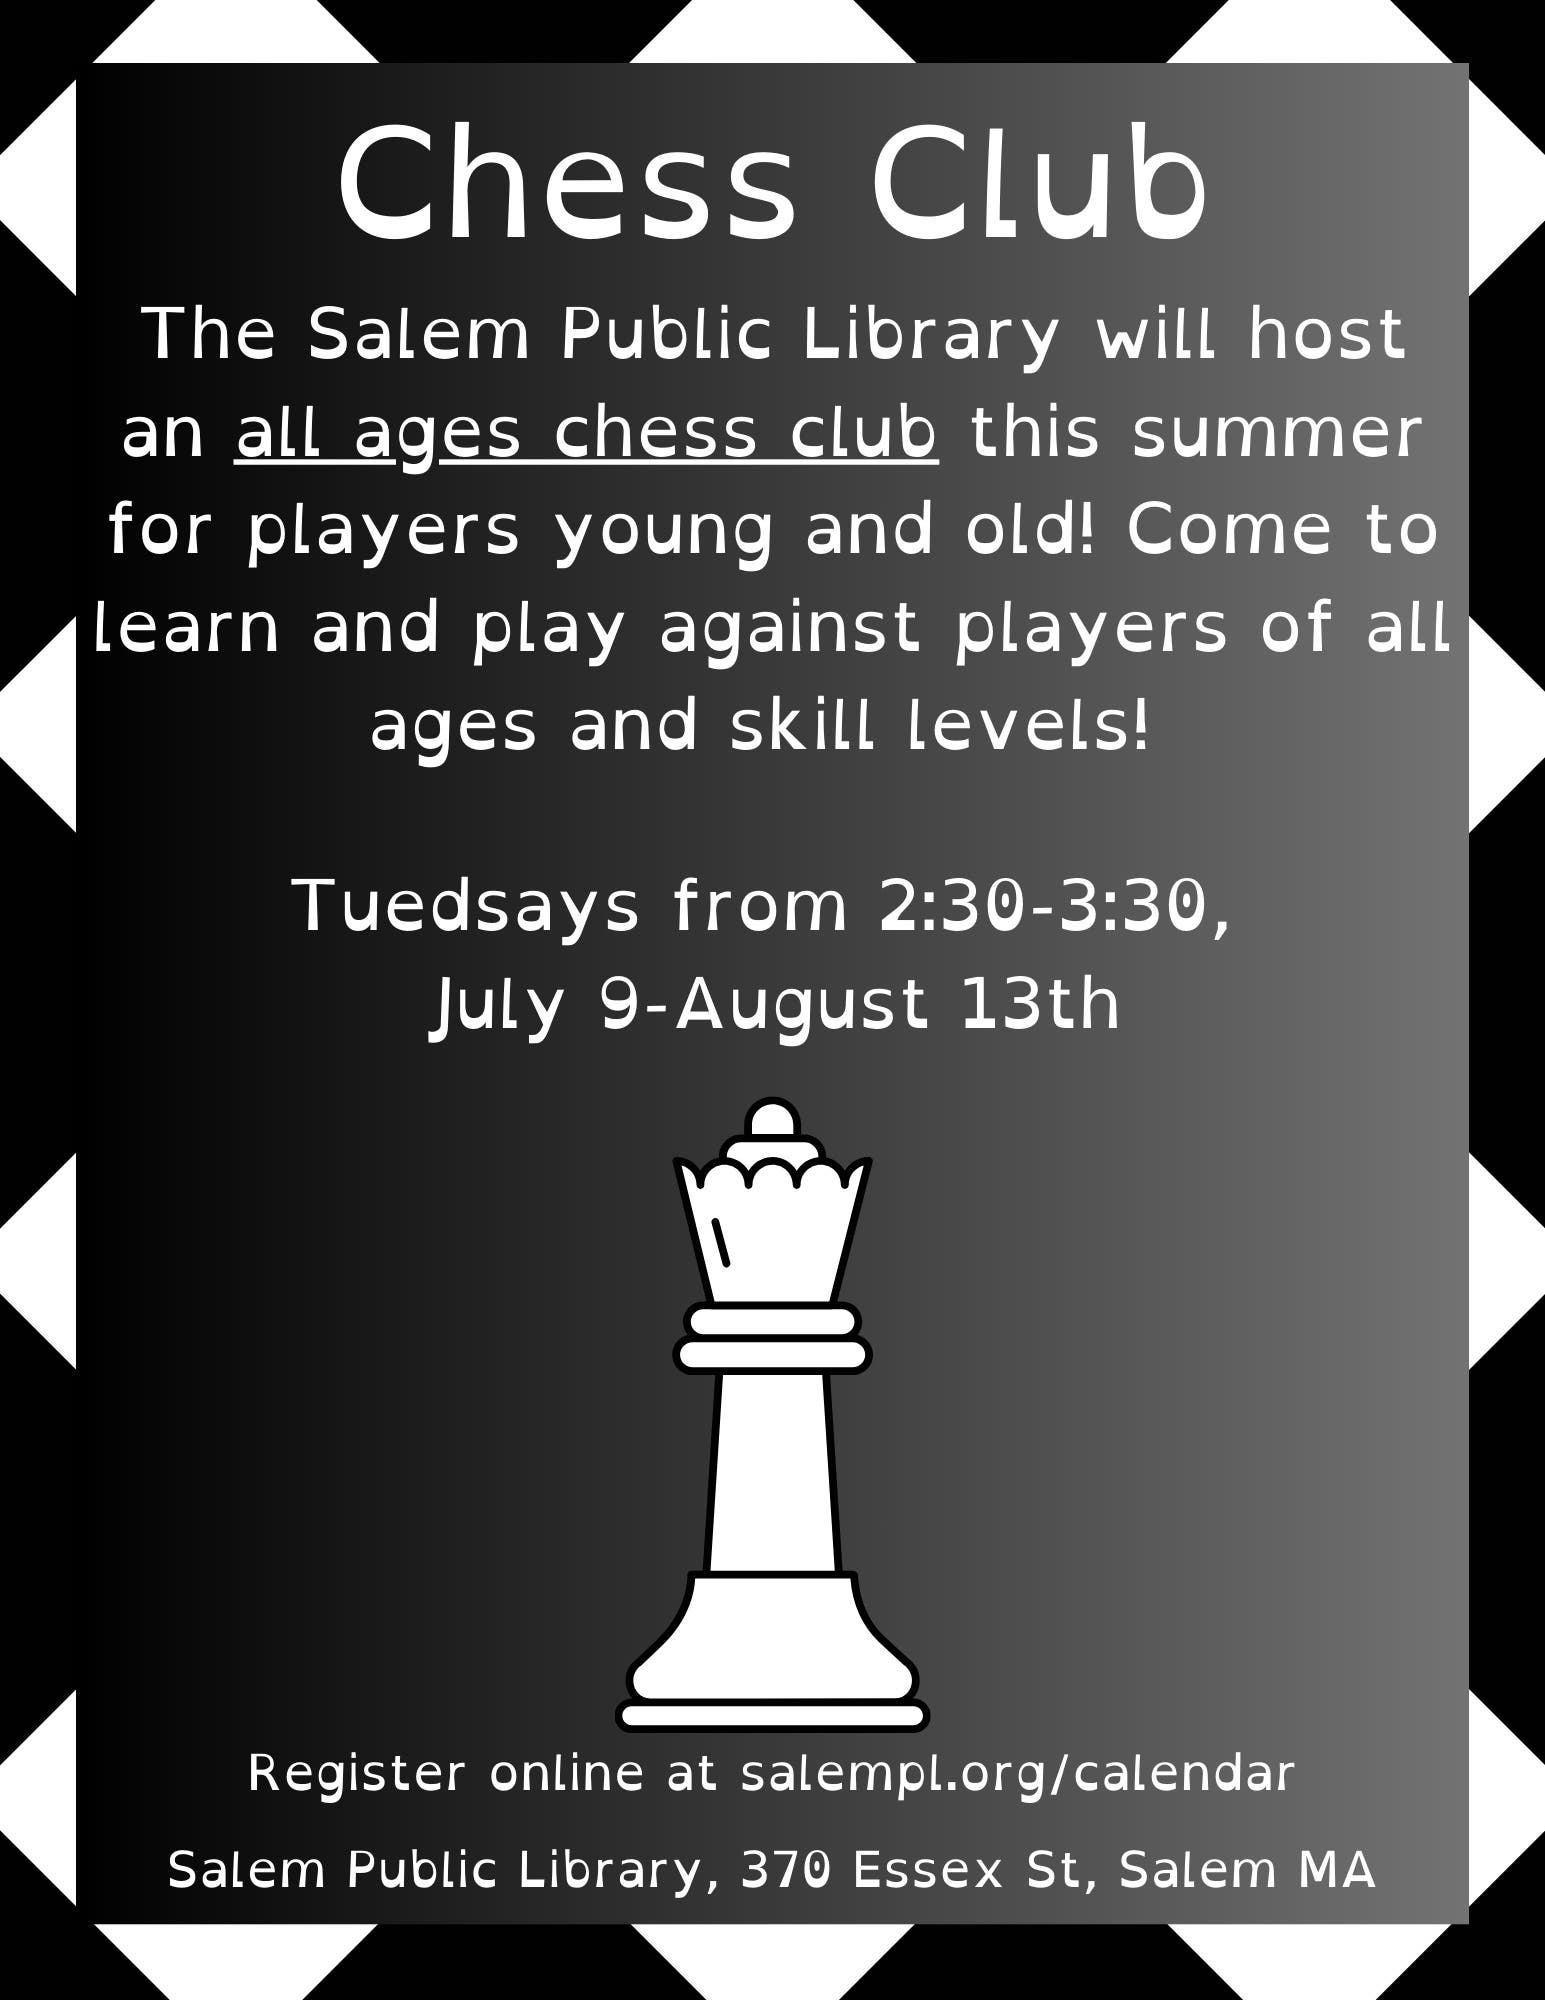 Chess Club for all ages